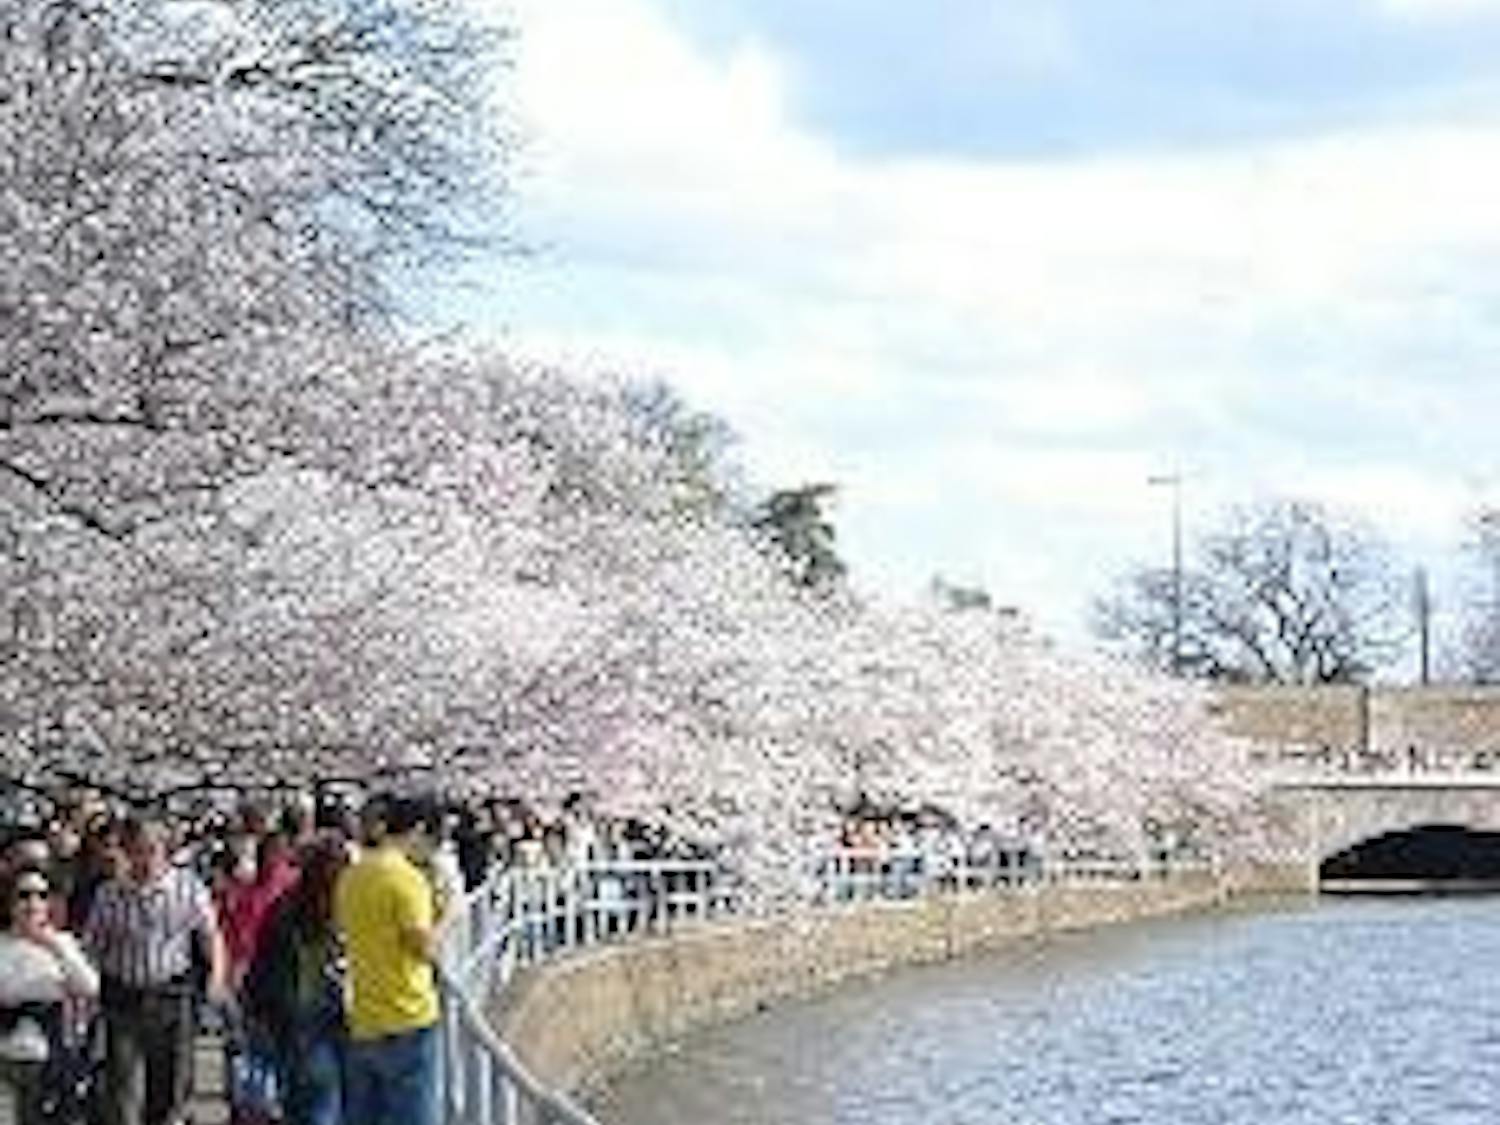 All IN BLOOM - Tourists crowd the Tidal Basin to admire the seasonal sight during what experts marked as the peak bloom period of the cherry trees. Two weekends of festivities took place in the District to commemorate the arrival of spring, including the 